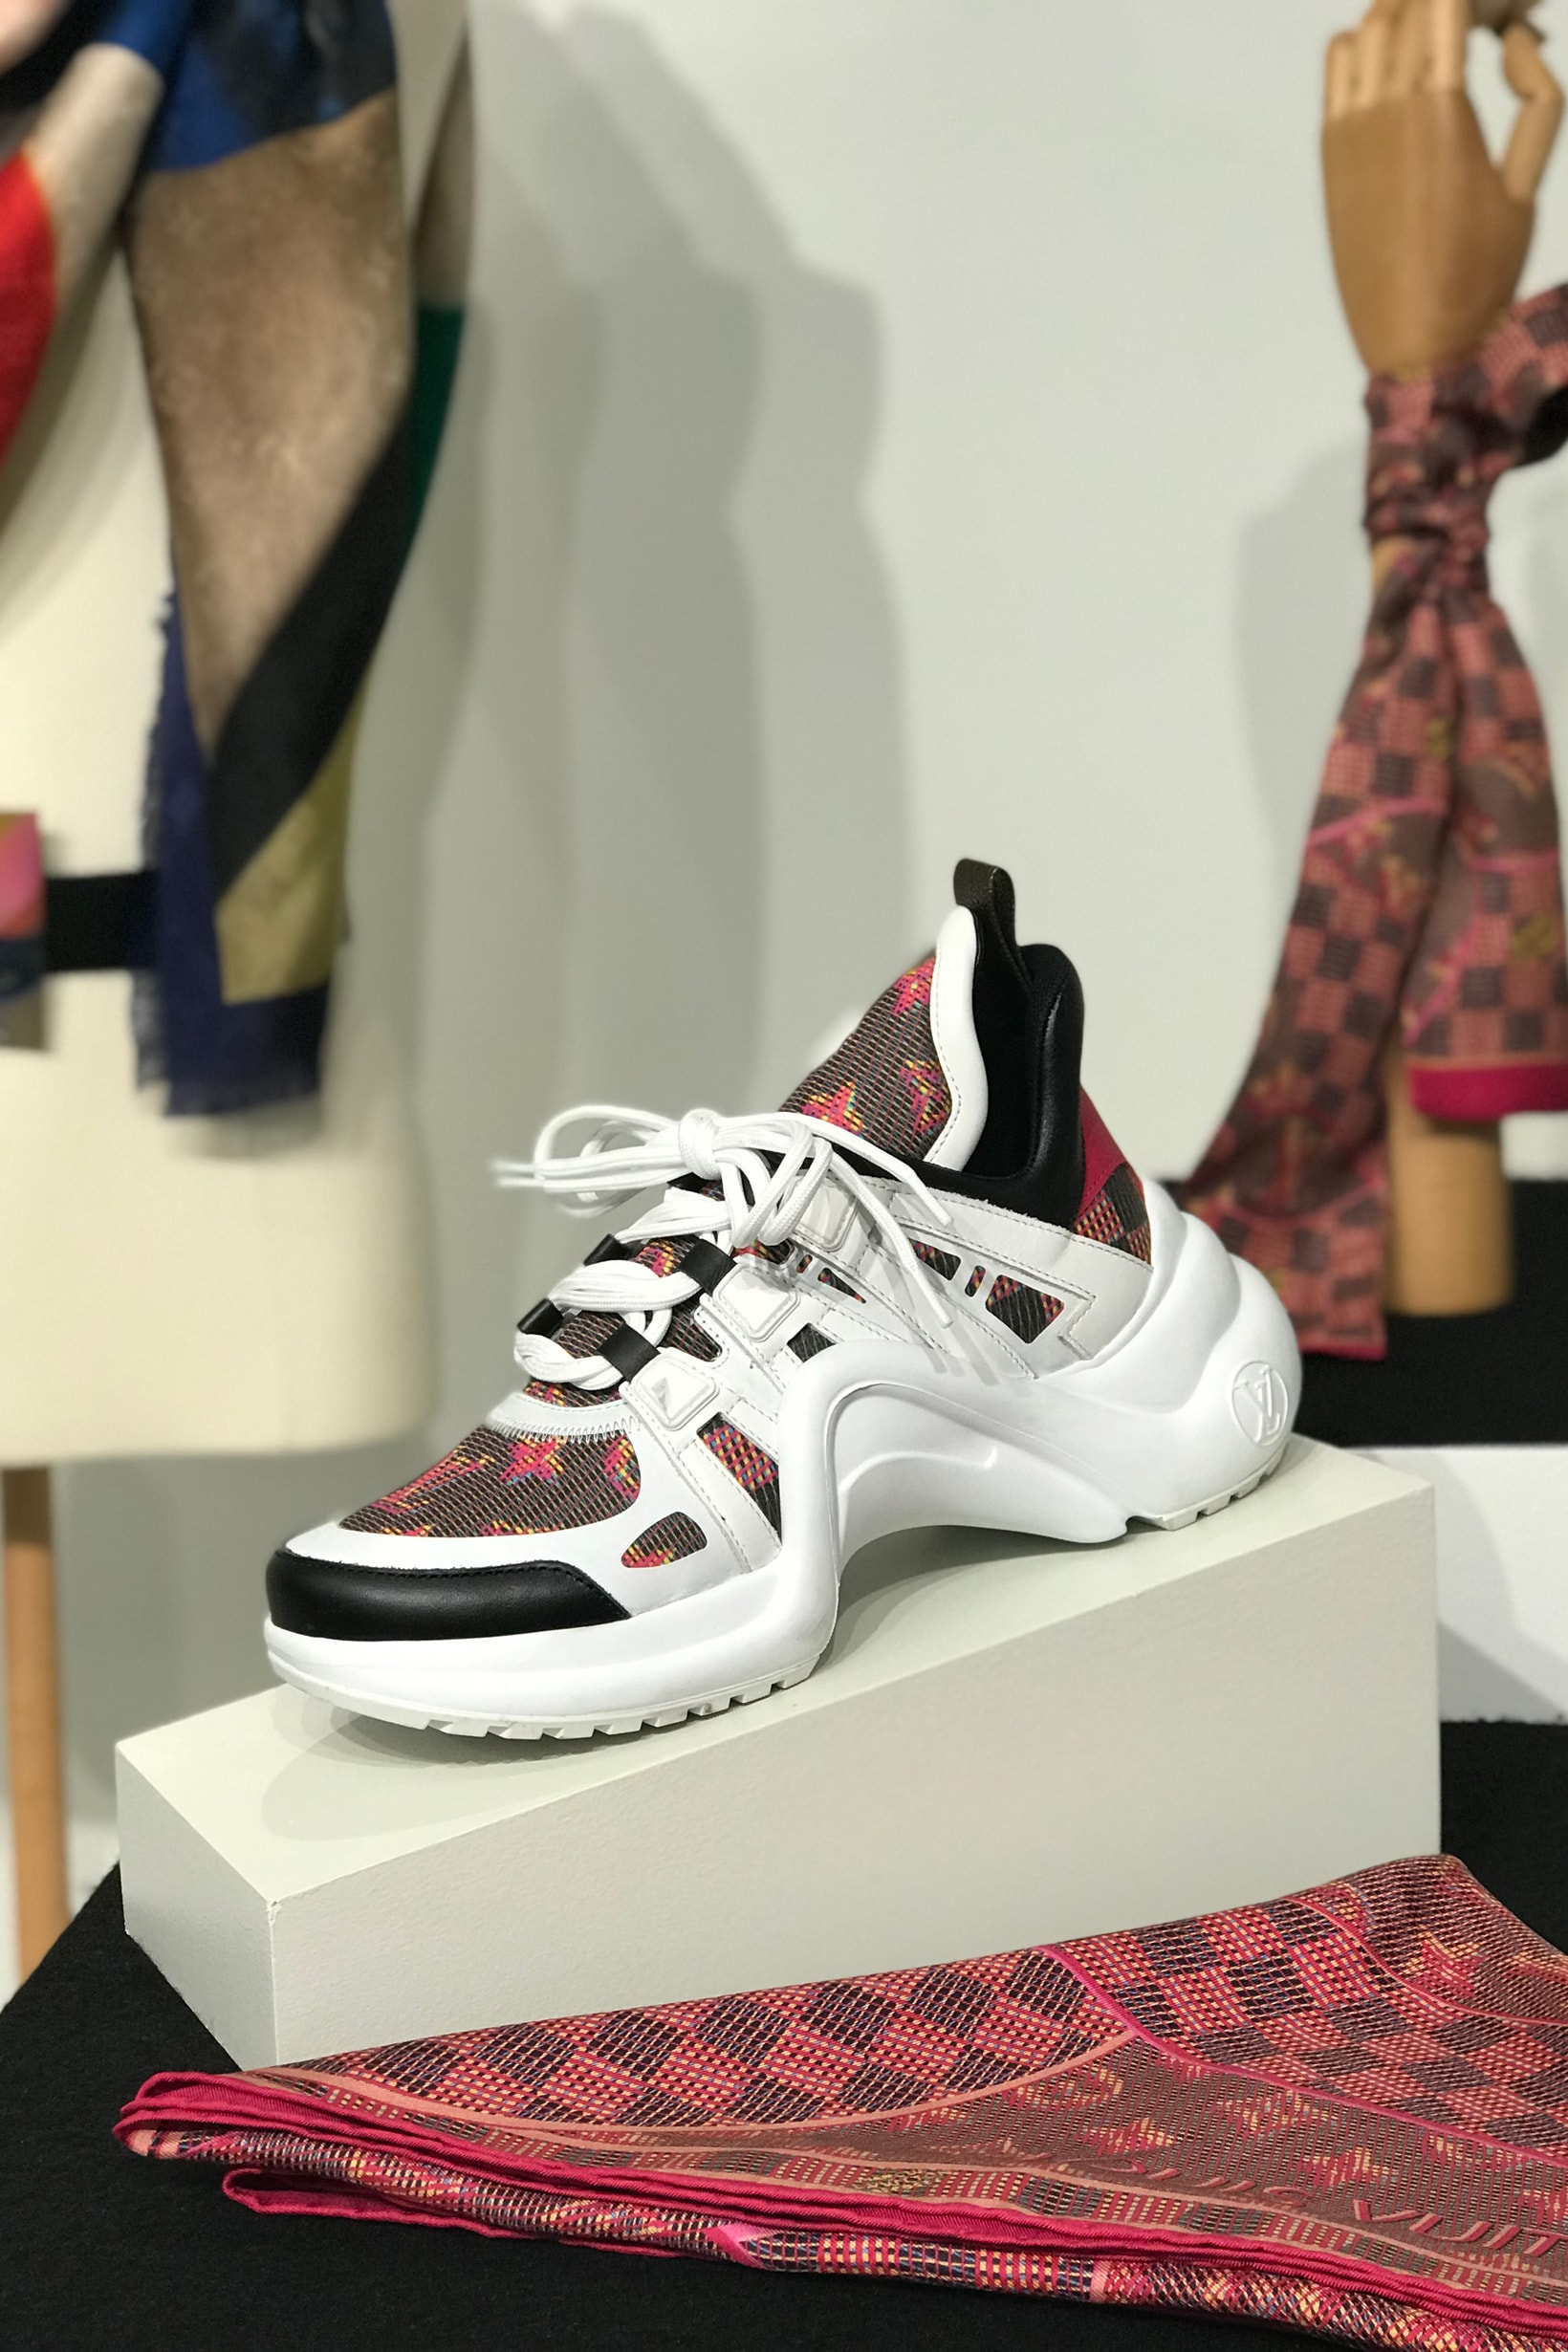 The article: LOUIS VUITTON FALL/WINTER 2019 SHOE COLLECTION